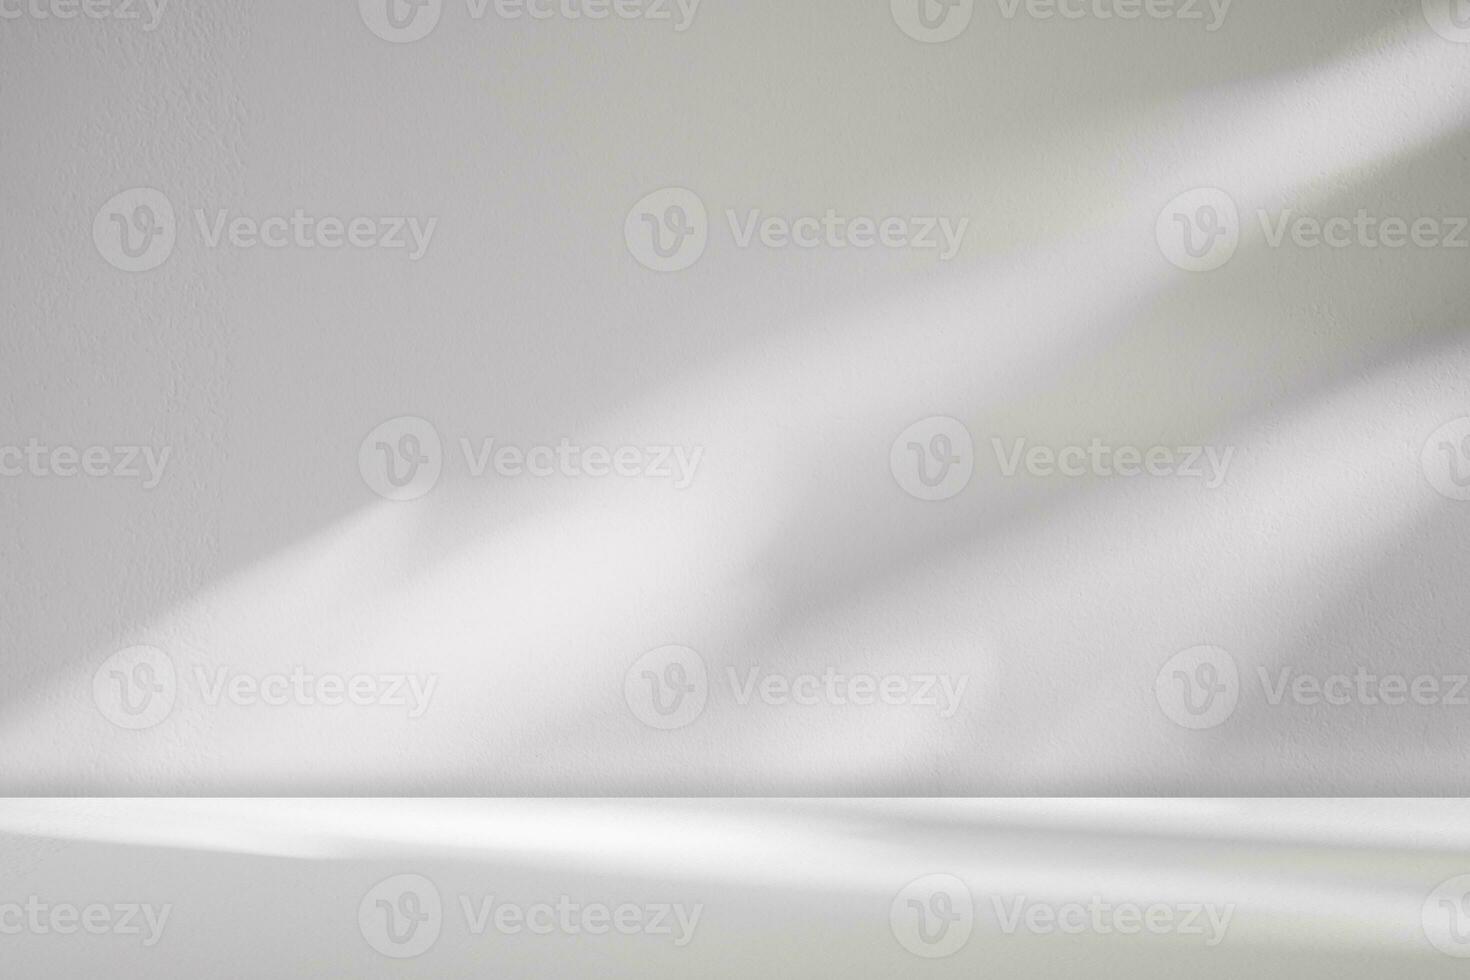 Background Studio,White Concrete Wall Texture with Leaves Shadow on Cement floor,Empty Grey Studio Room Display with Table Top,Backdrop background Cosmetic Product Display, Beauty Presentation photo